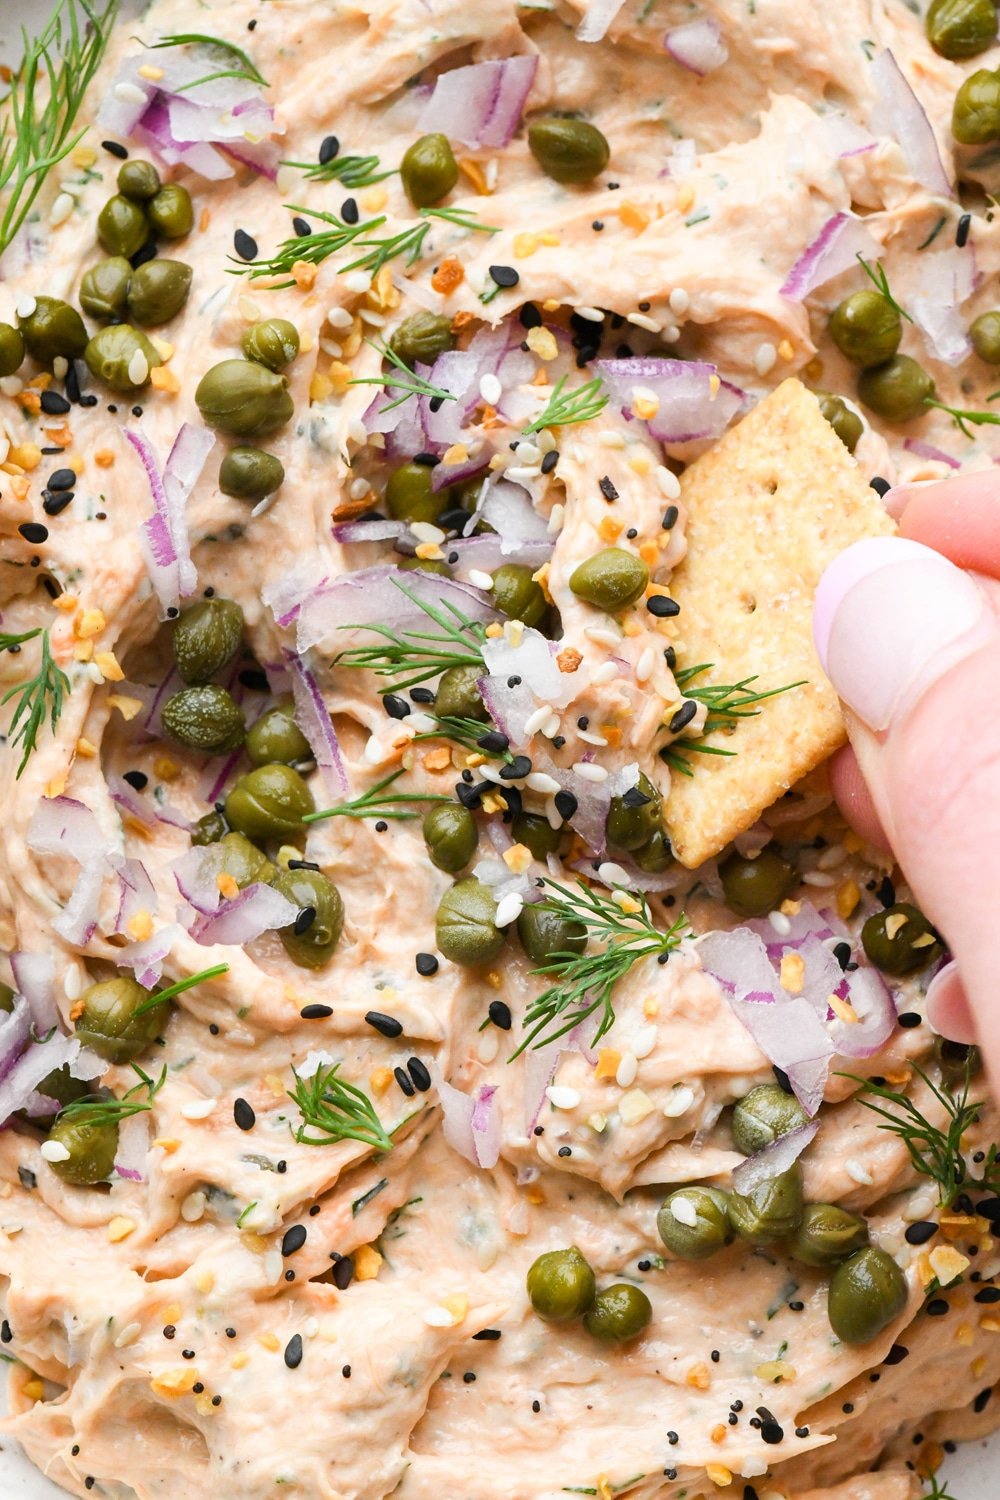 Dairy free smokes salmon dip in a small shallow ceramic speckled bowl, garnished with capers, fresh dill, everything but the bagel seasoning, and square gluten free crackers tucked into the dip and a hand dipping a cracker into the dip to lift it out.